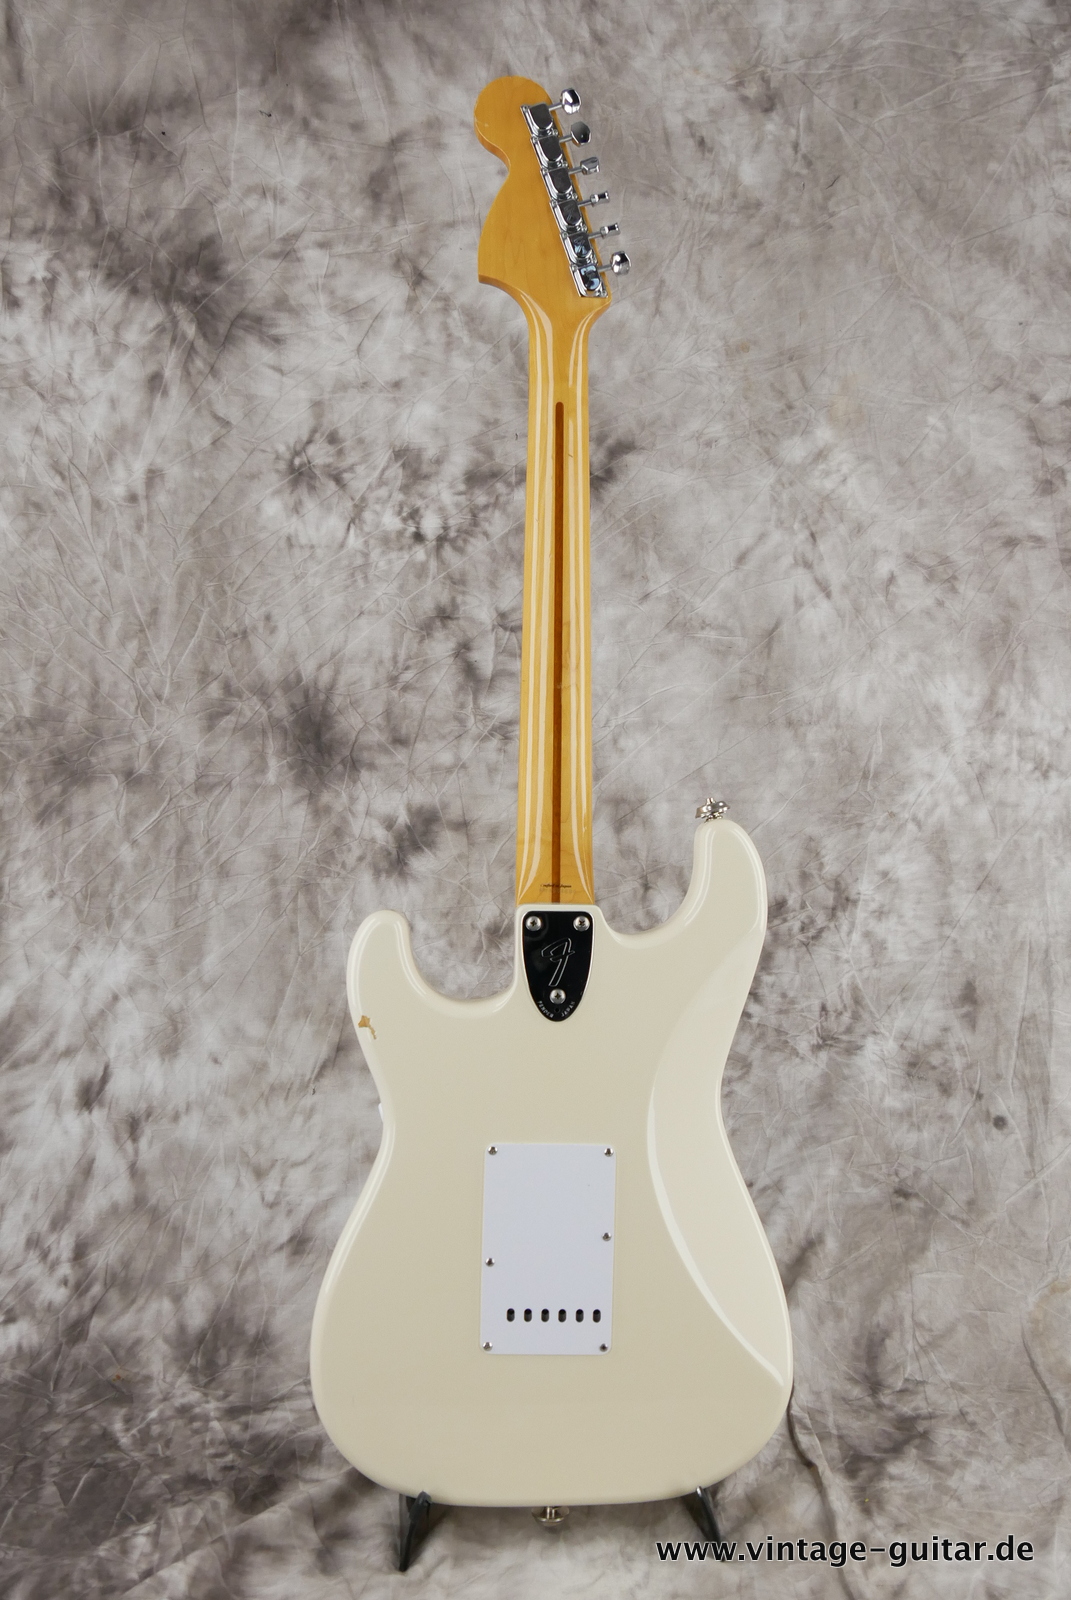 Fender_Strat_Stratocaster_Ritchie_Blackmore_ST-72RB_madeinjapan_1997_olympic_white_singed_scalloped_fretboard-002.JPG